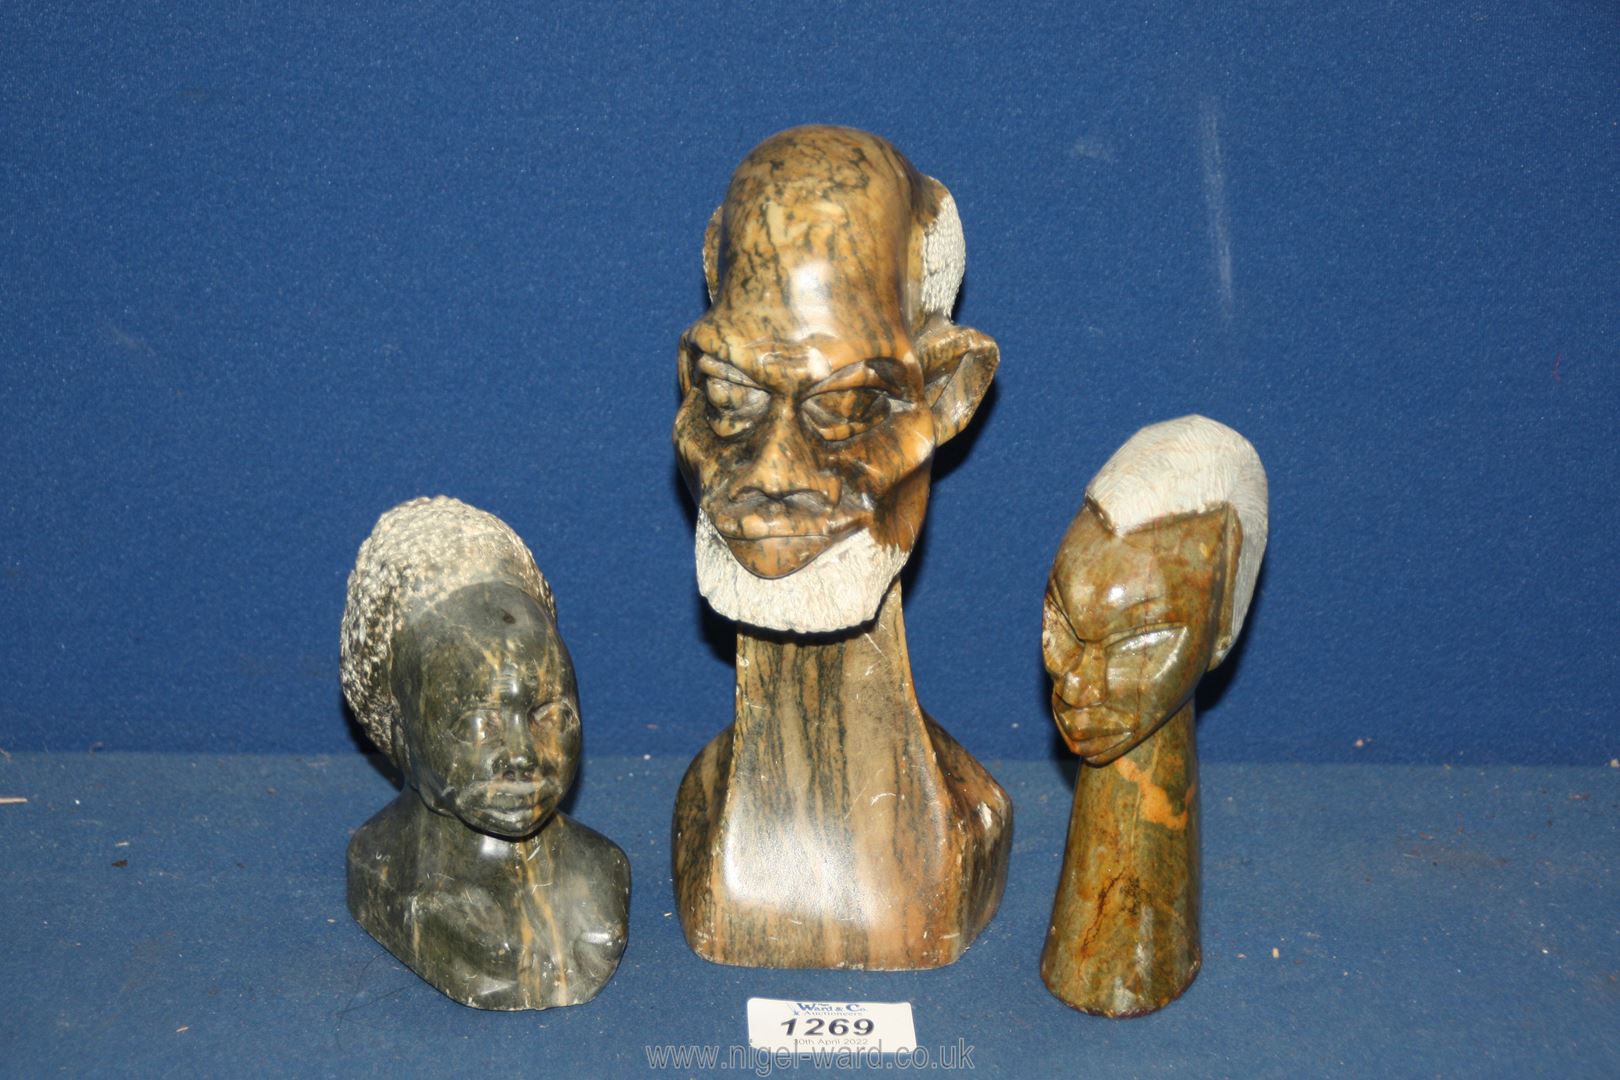 Three carved stone Ethnic heads, (some chips), 8'', 5 1/4'' and 4'' tall.